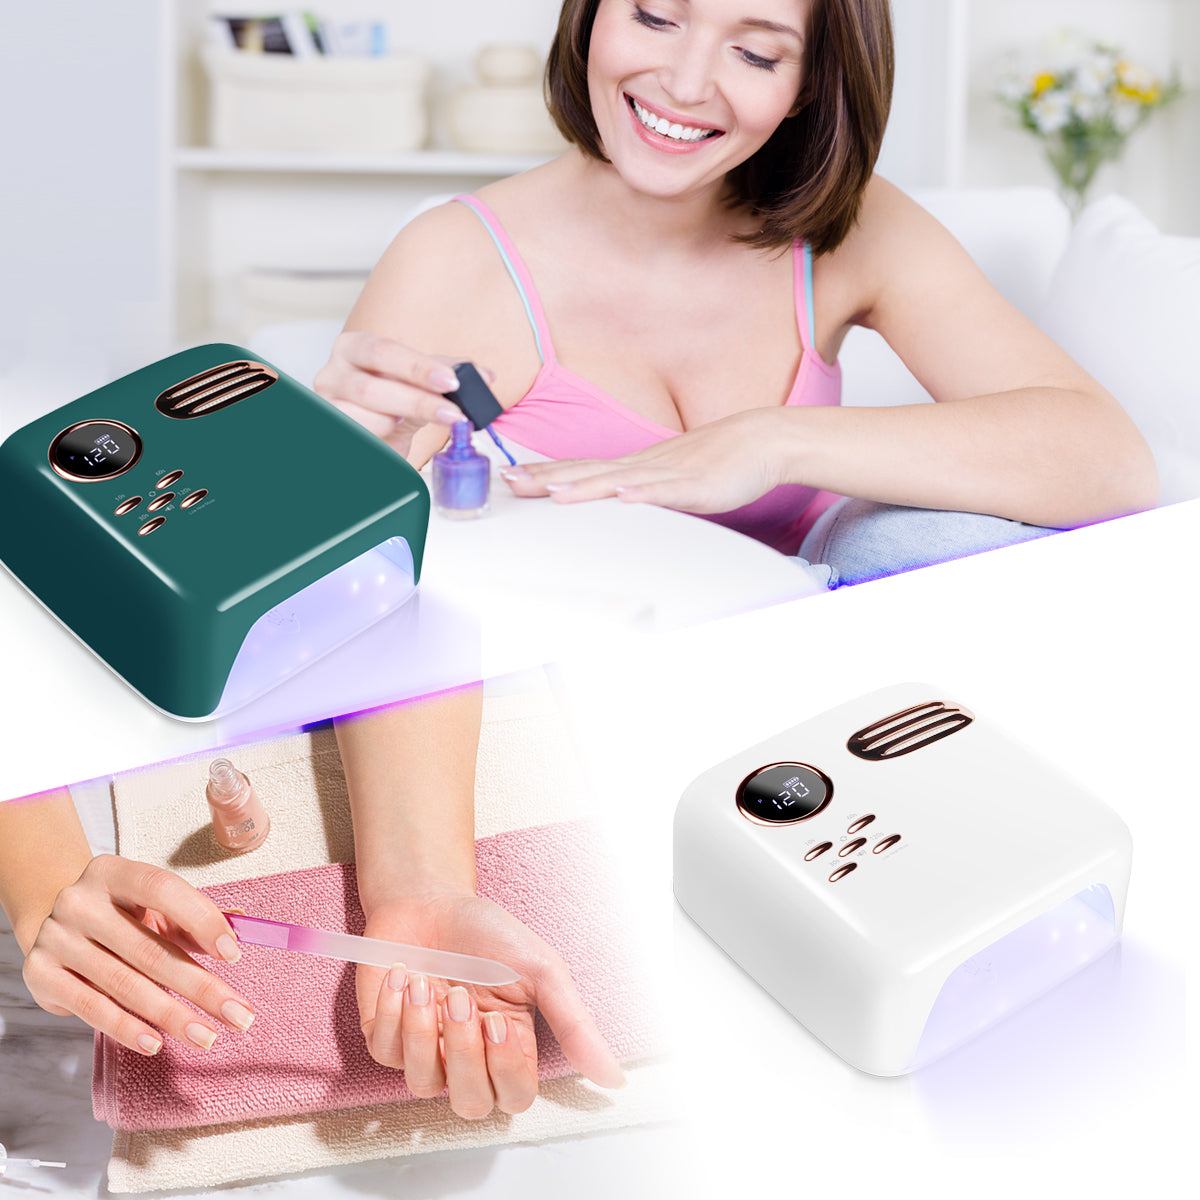 Bete Cordless LED Nail Lamp, Wireless Nail Dryer, 72W Rechargeable LED Nail Light, Portable Gel UV LED Nail Lamp with 4 Timer Setting Sensor and LCD